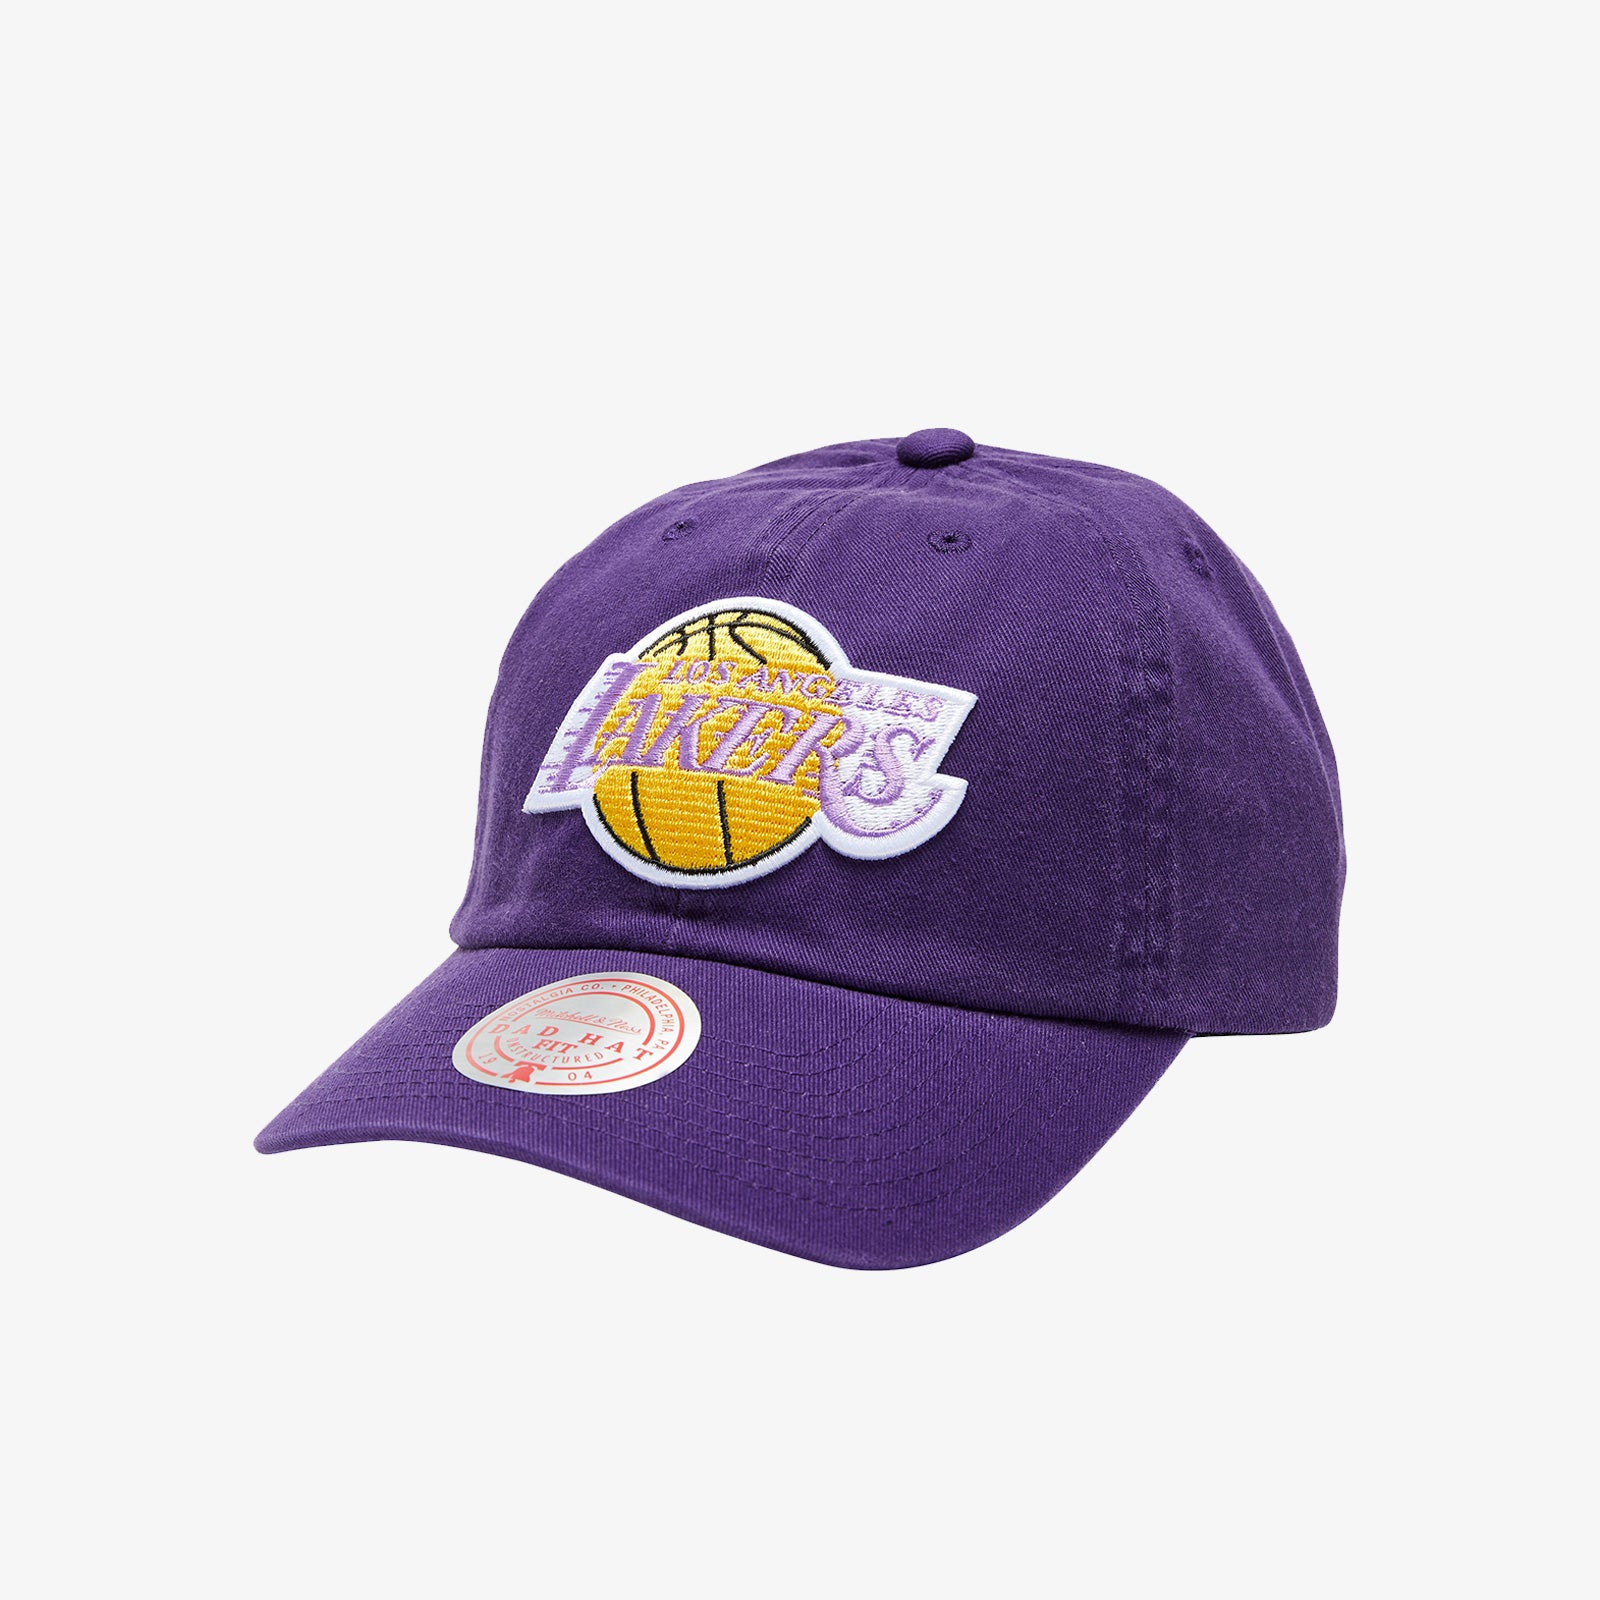 Los Angeles Lakers '47 Team Franchise Fitted Hat - Black